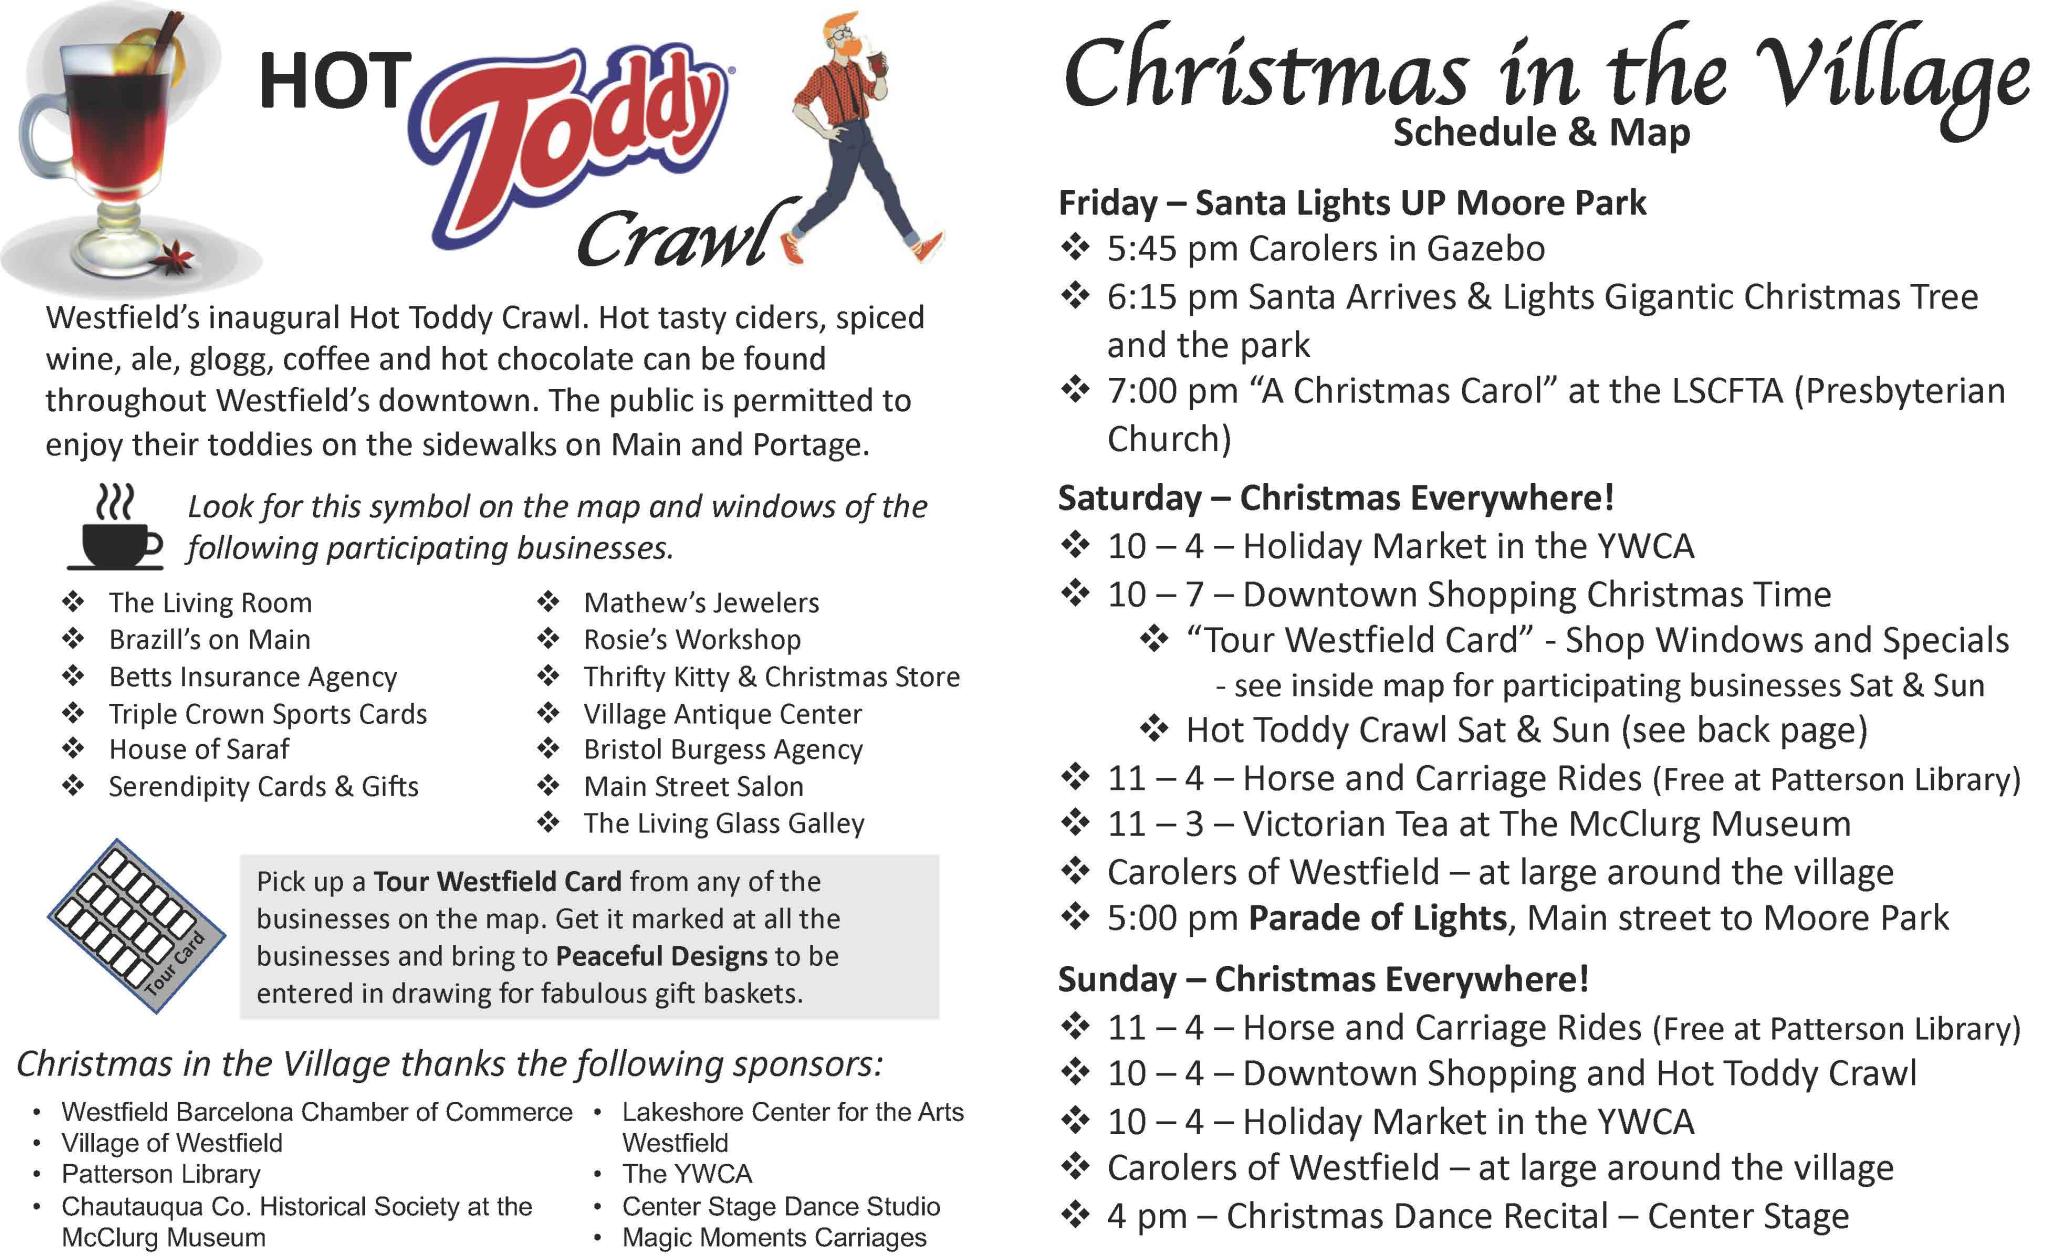 2018 Christmas In the Village Schedule & Map page 1